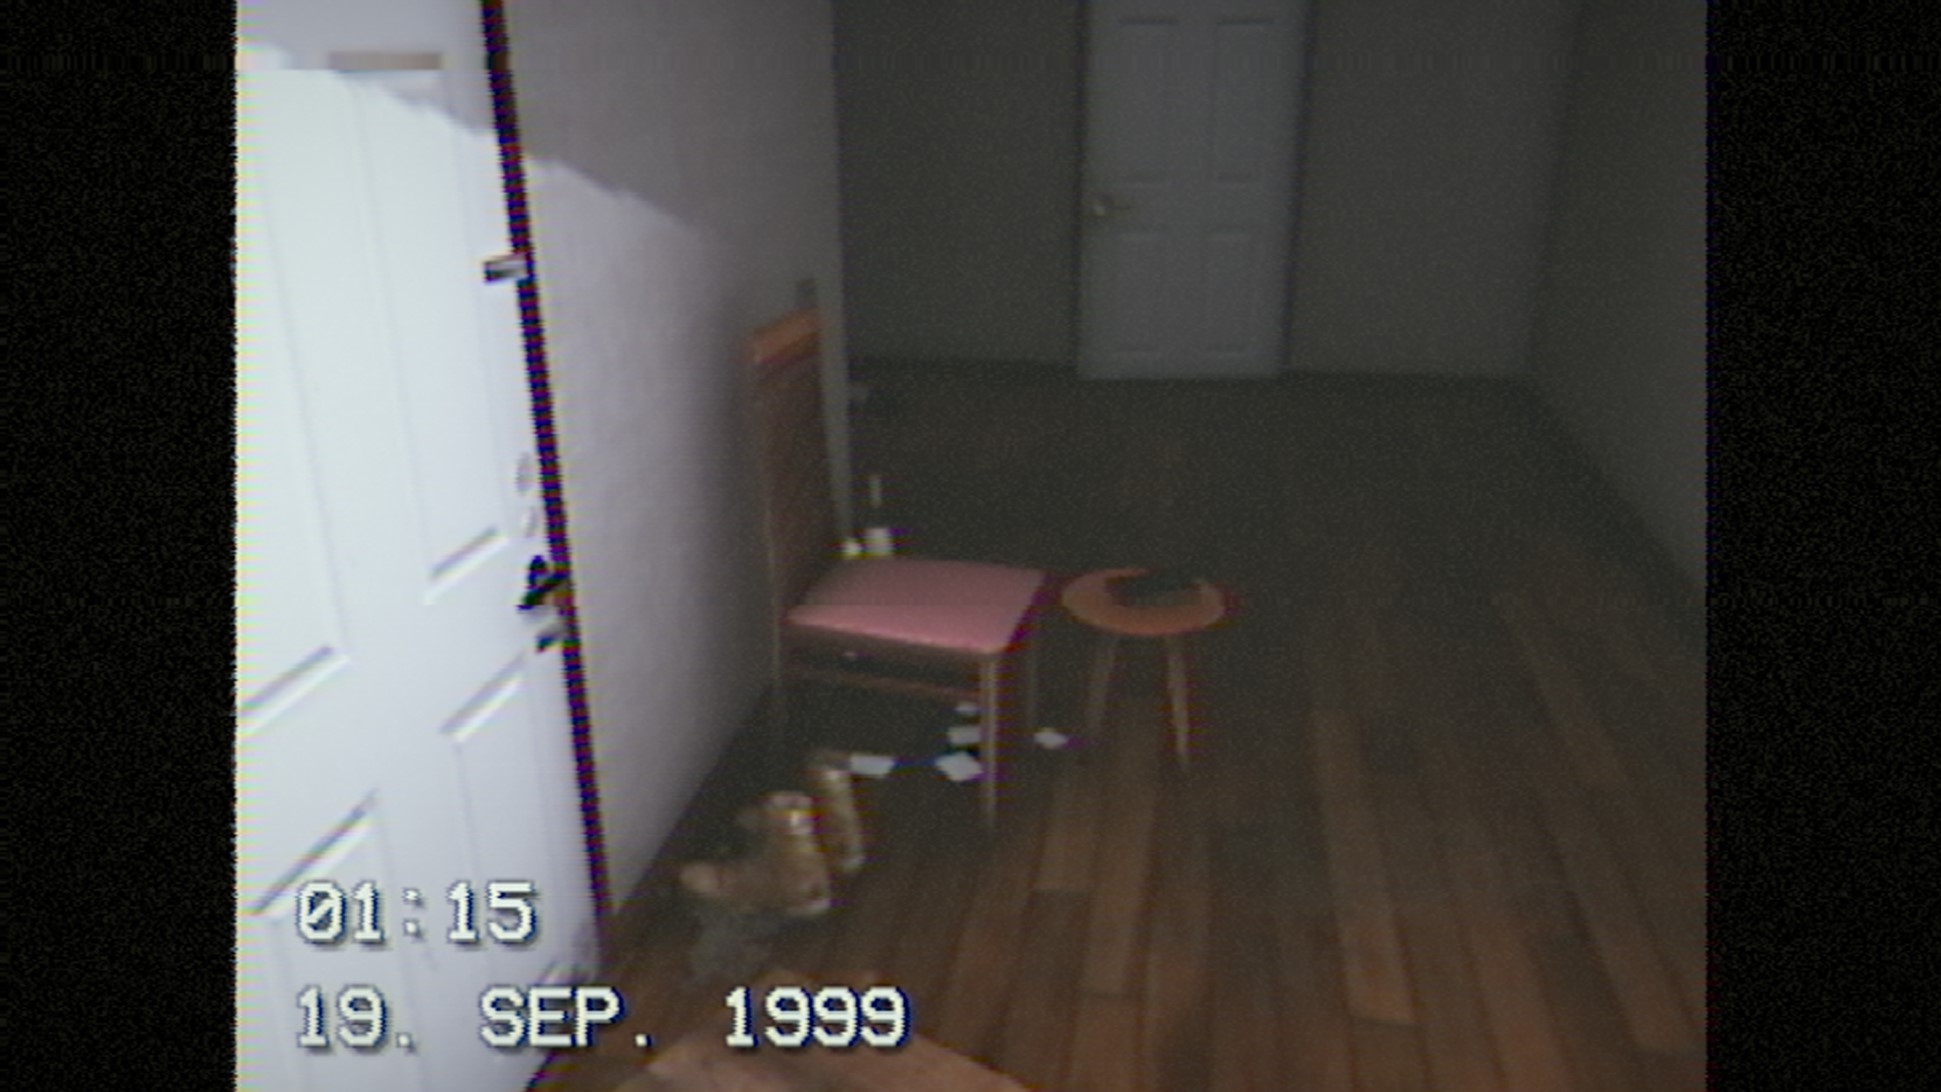 An empty-looking hallway of a detached house captured through the lens of an old camera, with the date and time displayed in the left corner. 